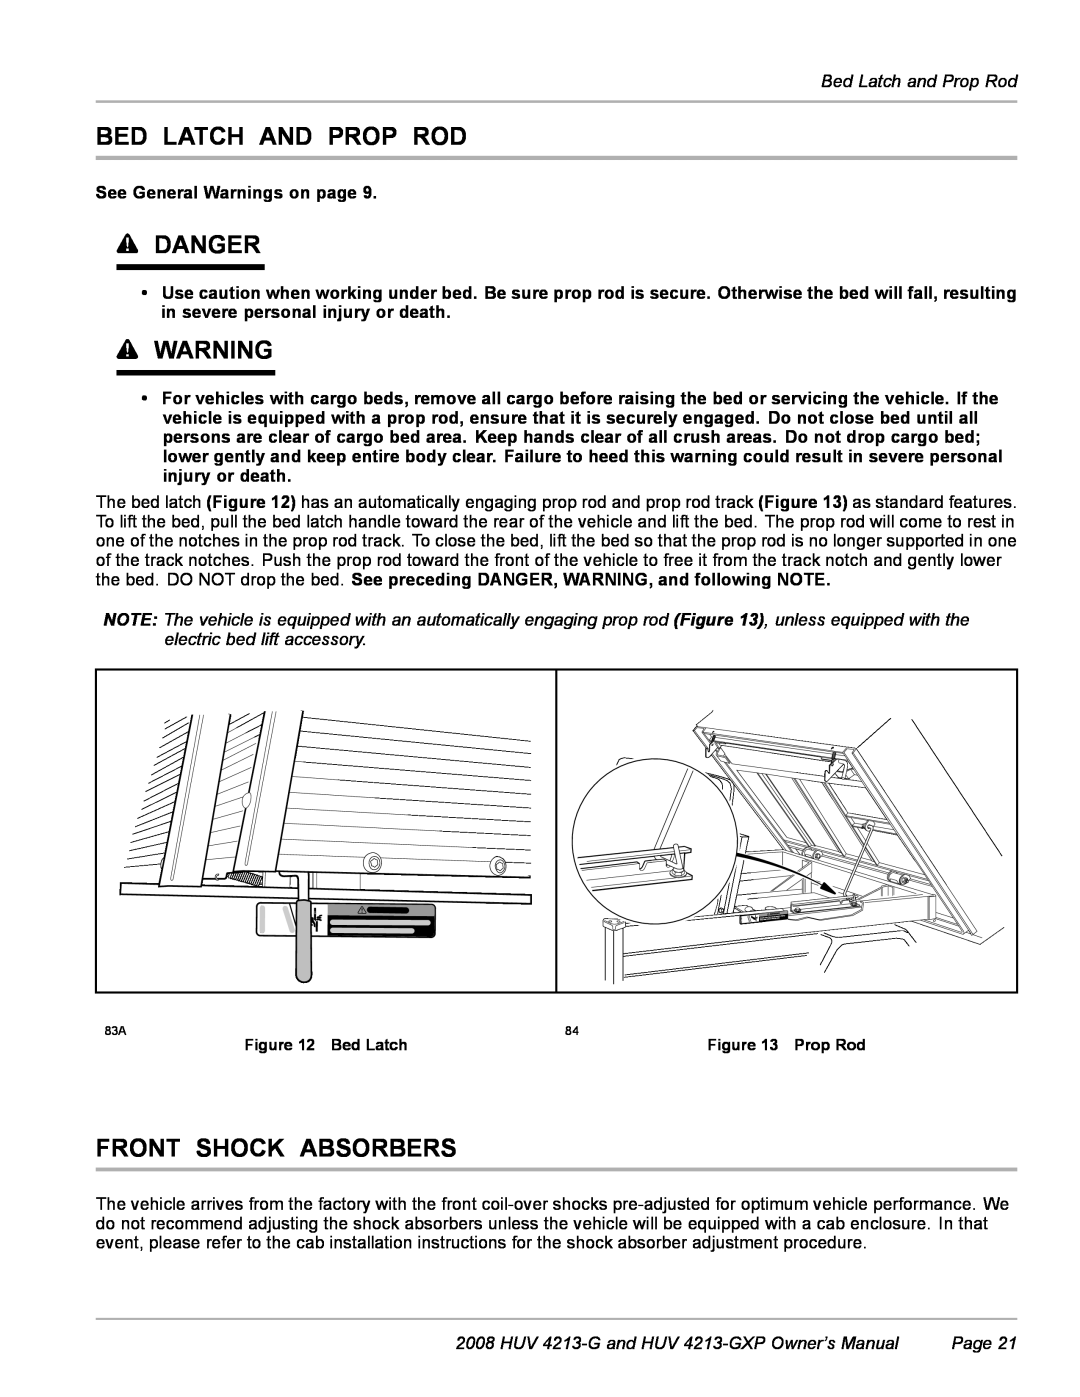 Husqvarna HUV 4213-GXP owner manual Bed Latch And Prop Rod, Front Shock Absorbers, Danger 